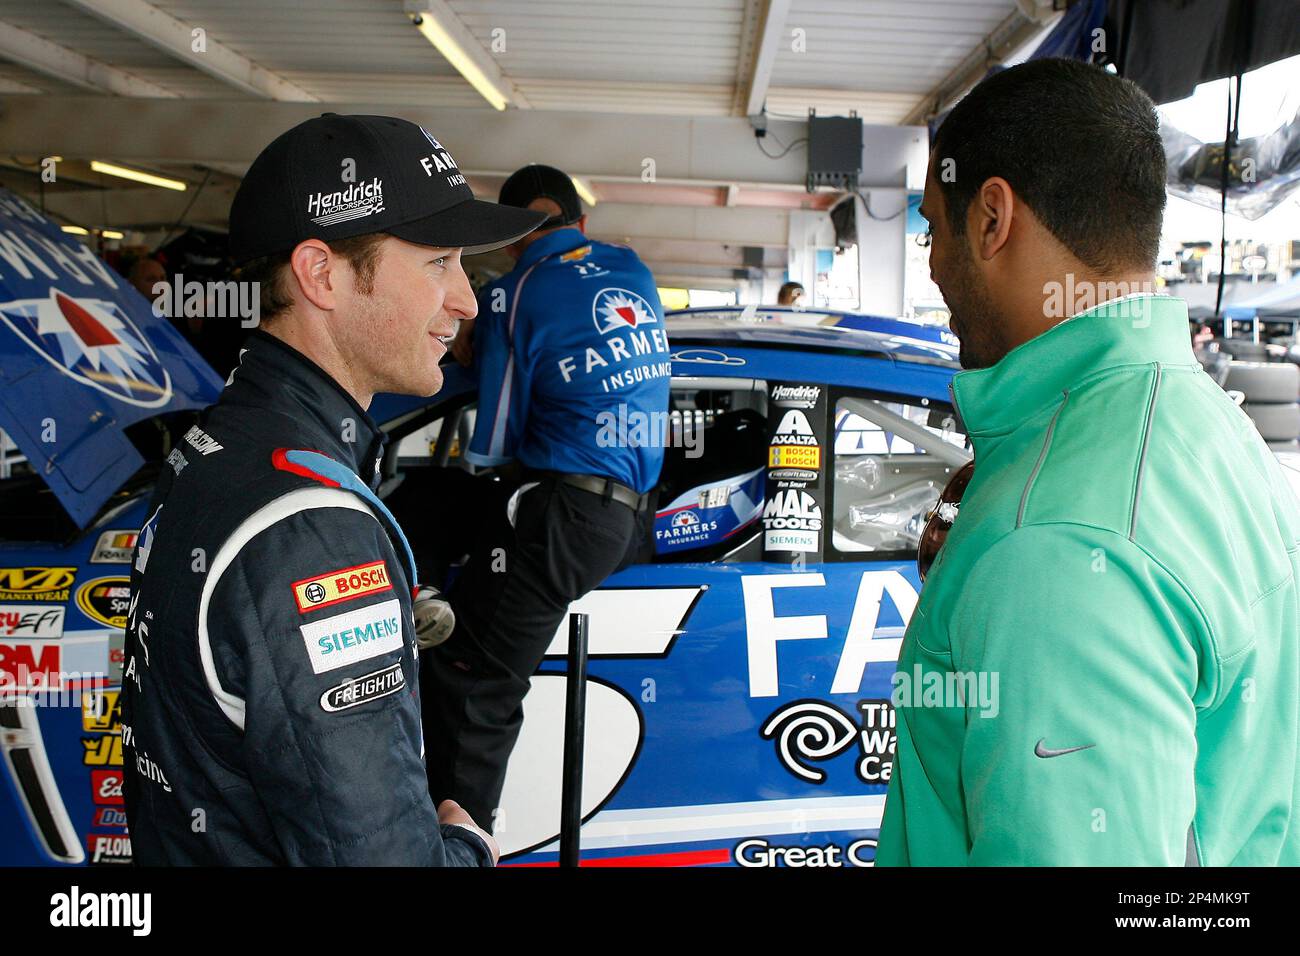 https://c8.alamy.com/comp/2P4MK9T/seattle-seahawks-quarterback-russell-wilson-and-kasey-kahne-during-practice-for-the-nascar-sprint-cup-series-the-profit-on-cnbc-500-race-at-phoenix-international-raceway-saturday-march-1-2014-in-avondale-ariz-ap-photonkp-russell-labounty-mandatory-credit-2P4MK9T.jpg